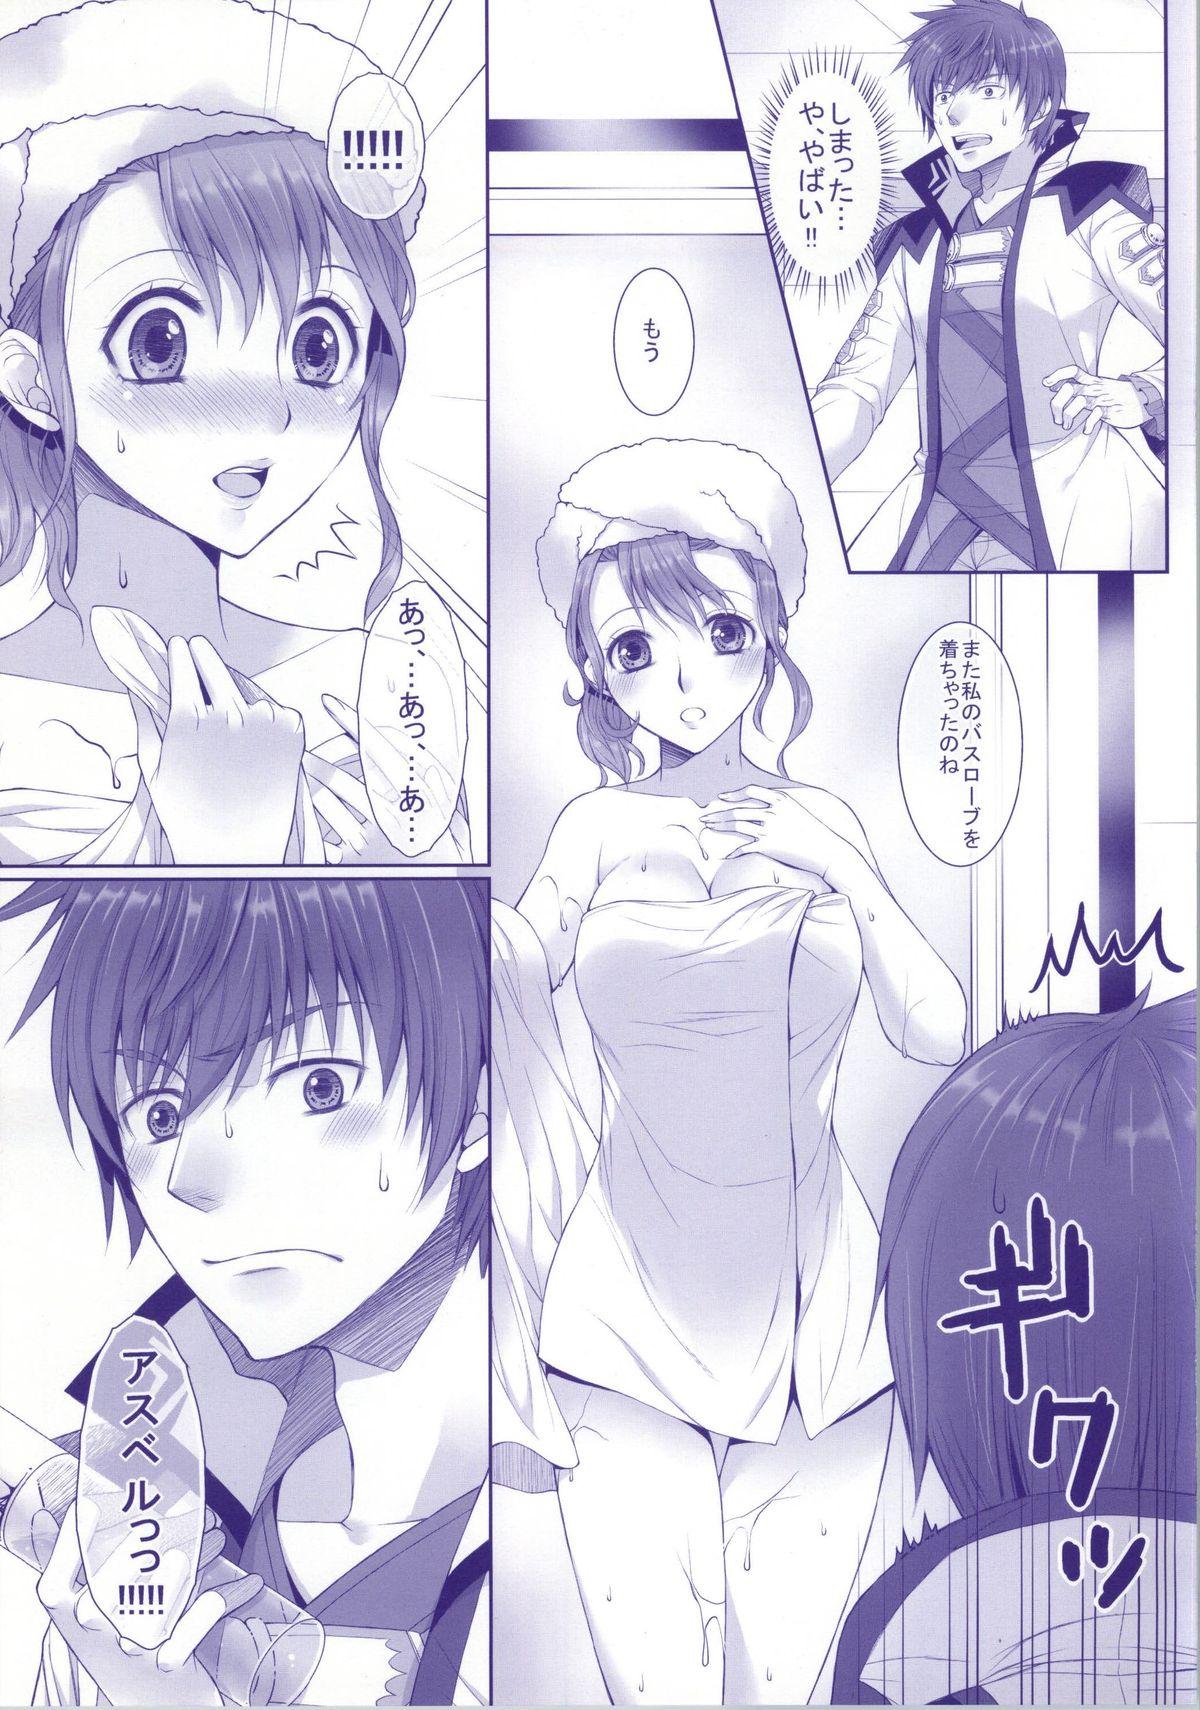 Glory Hole my favorite flower - Tales of graces High Heels - Page 6